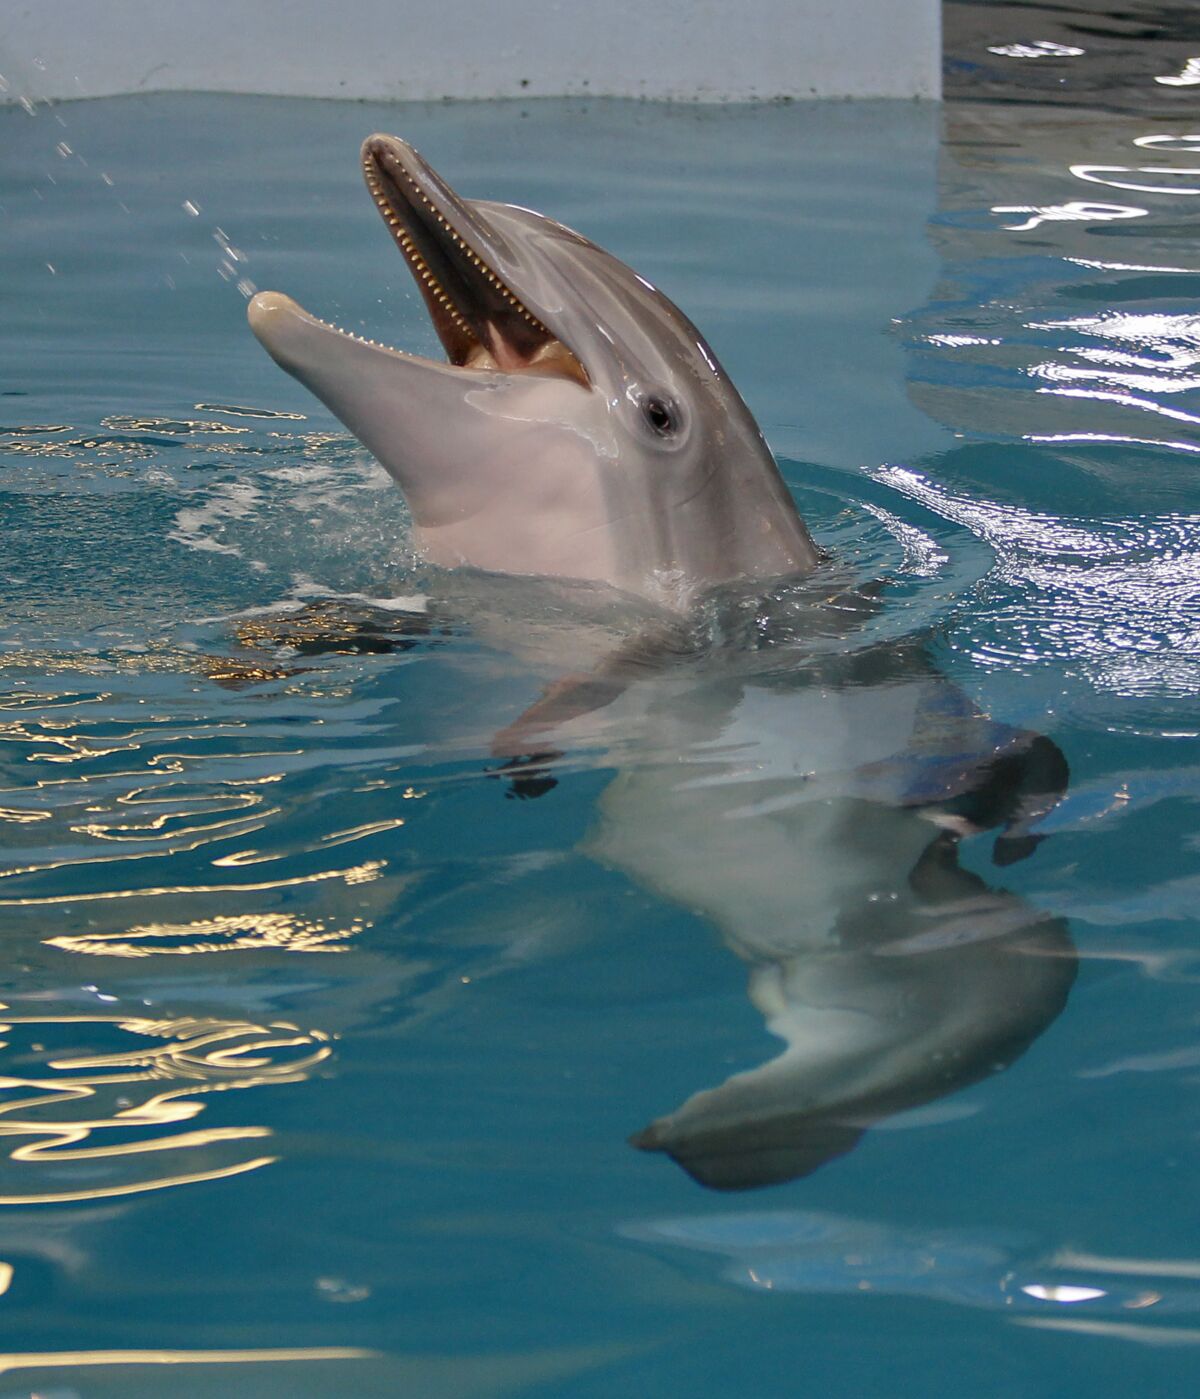 Winter the dolphin plays in the water at the Clearwater Marine Aquarium, Sunday, June 17, 2018, in Clearwater, Fla. The Florida aquarium will temporarily close to treat its resident prosthetic-tailed dolphin that starred in the “Dolphin Tale” movies. The famous marine mammal is now in critical condition from a suspected infection. The Clearwater Marine Aquarium said in a statement it will shut its doors Friday, Nov. 12, 2021 “to create the best possible environment" for medical staff to treat Winter, a 16-year-old female bottlenose dolphin suffering from a gastrointenstinal infection. (Jim Damaske/Tampa Bay Times via AP, file)